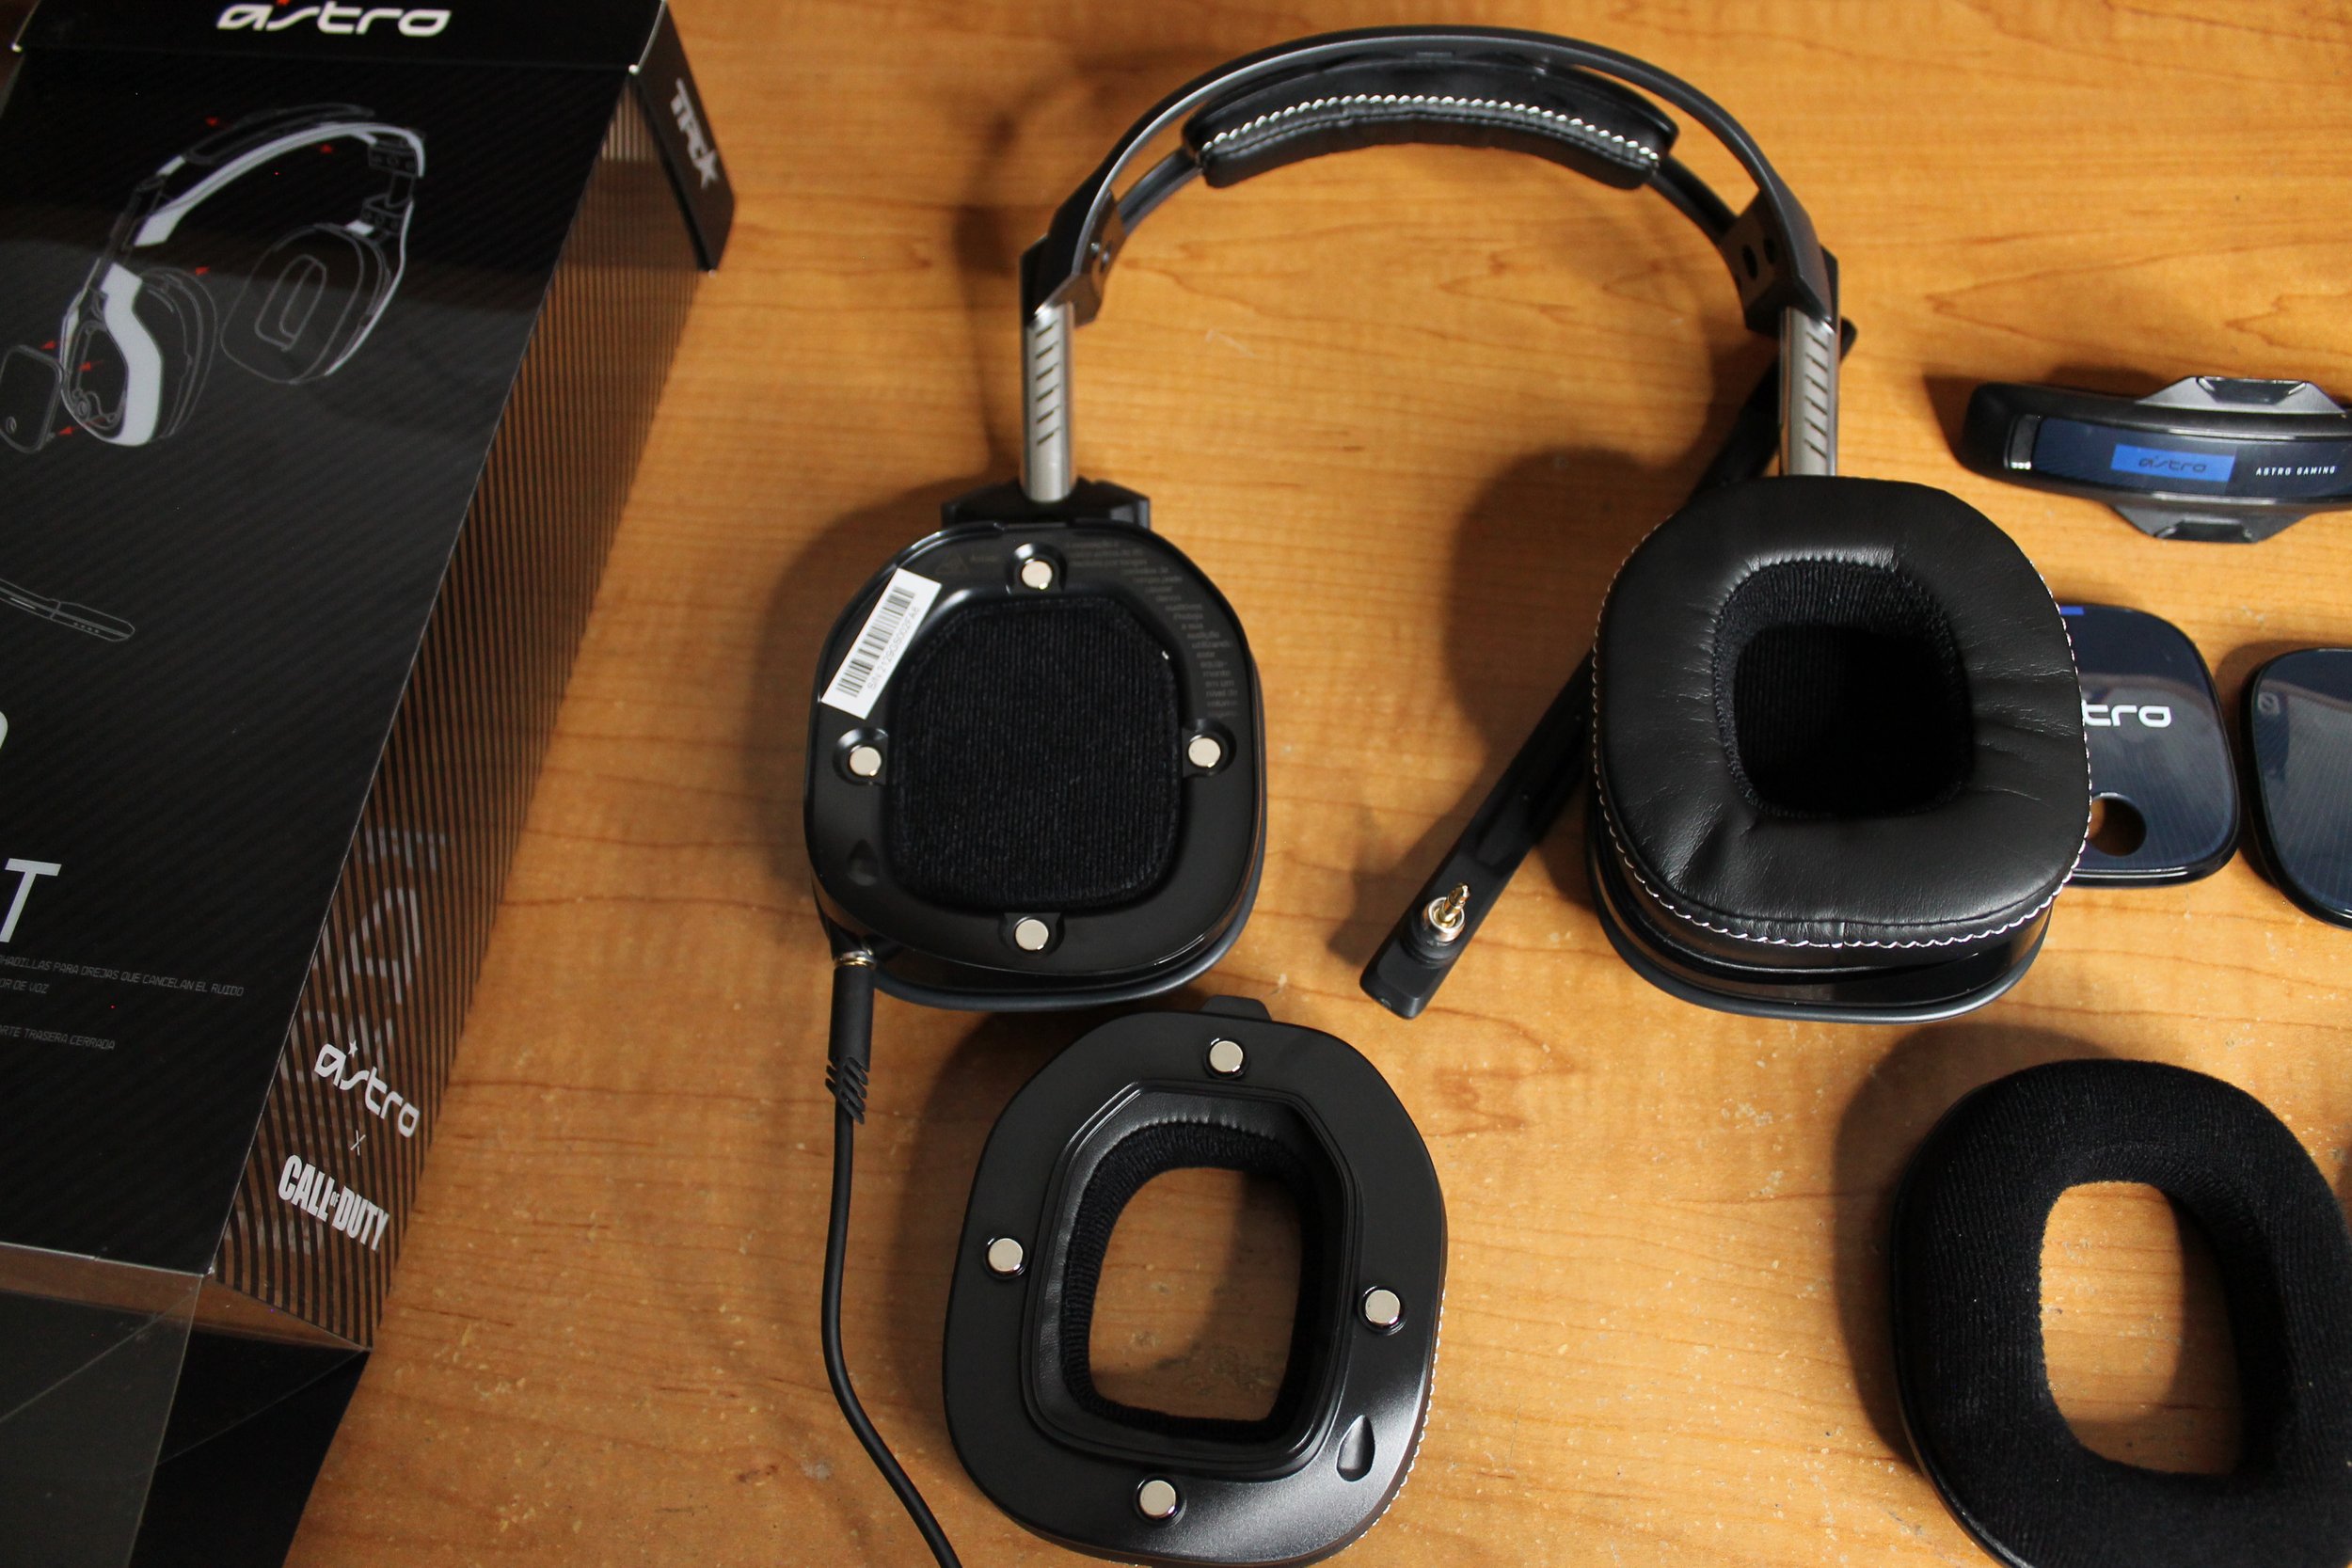 Astro A40 TR Mod Kit Review — Stream Tech Reviews by BadIntent